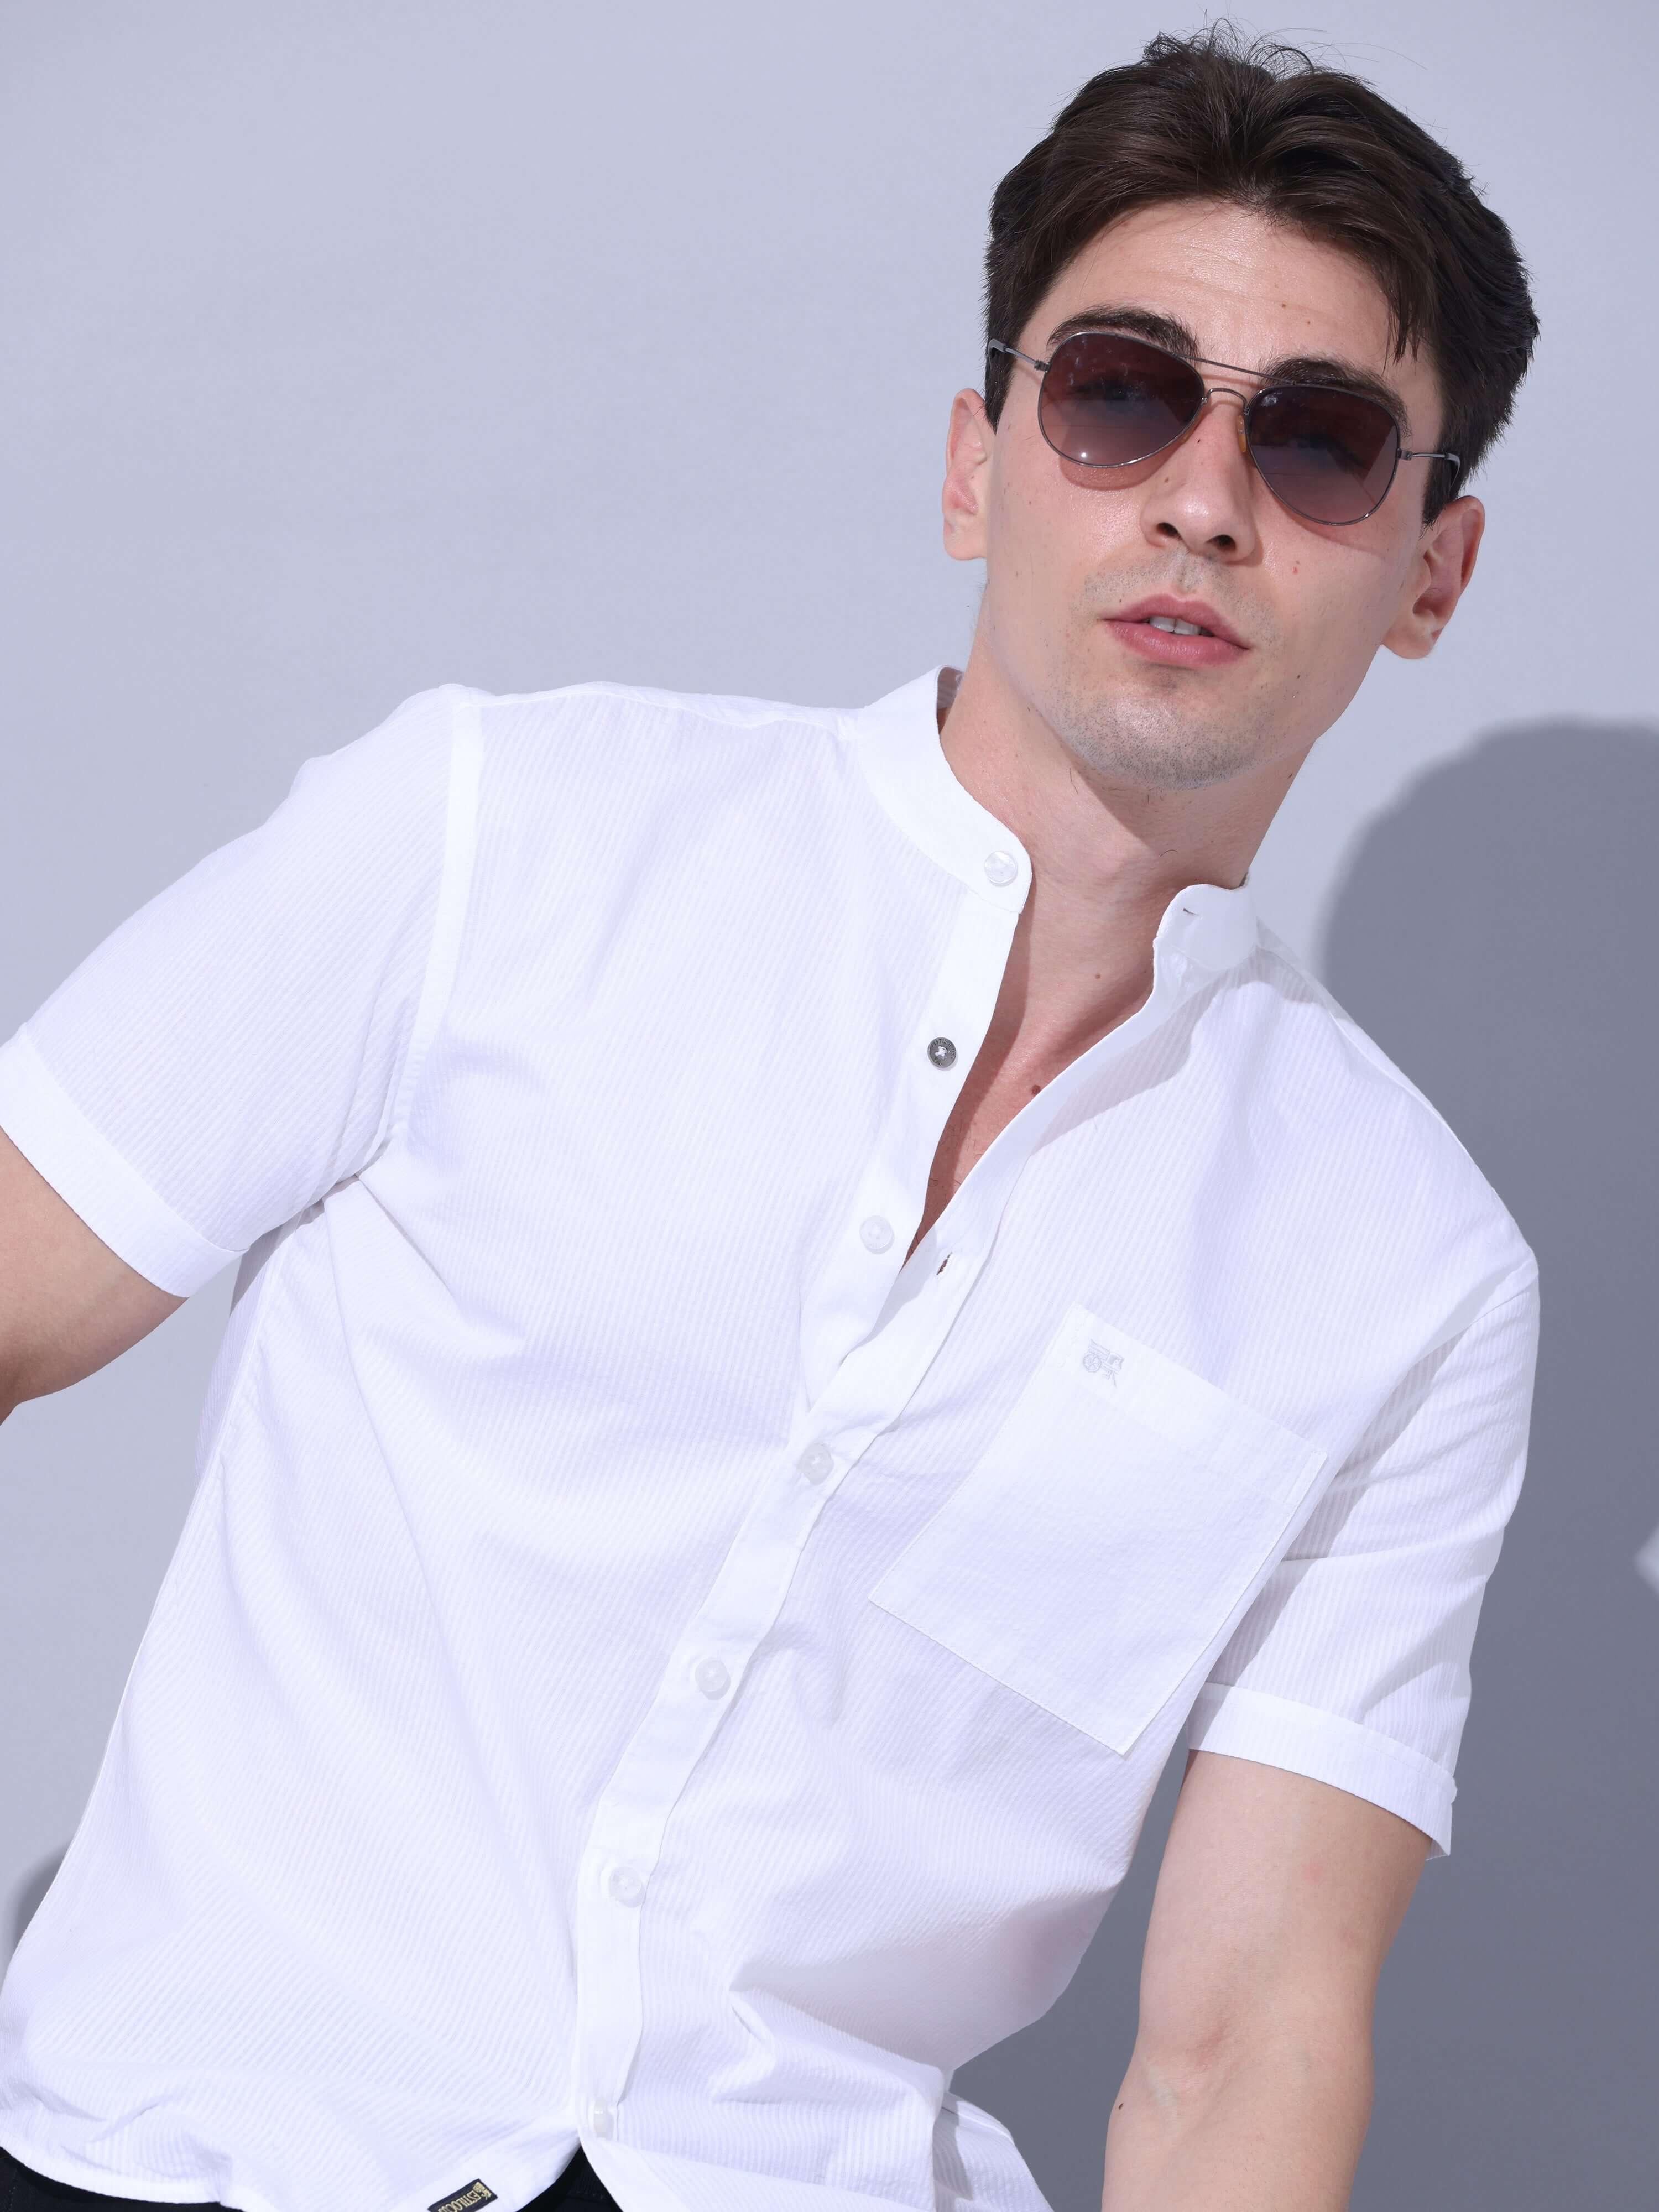 White Casual Shirt shop online at Estilocus. • Half-sleeve solid stripe shirt • Cut and sew placket • Regular collar • Single pocket with logo embroidery • Curved hemline • Finest quality sewing • Machine wash care • Suitable to wear with all types of bot